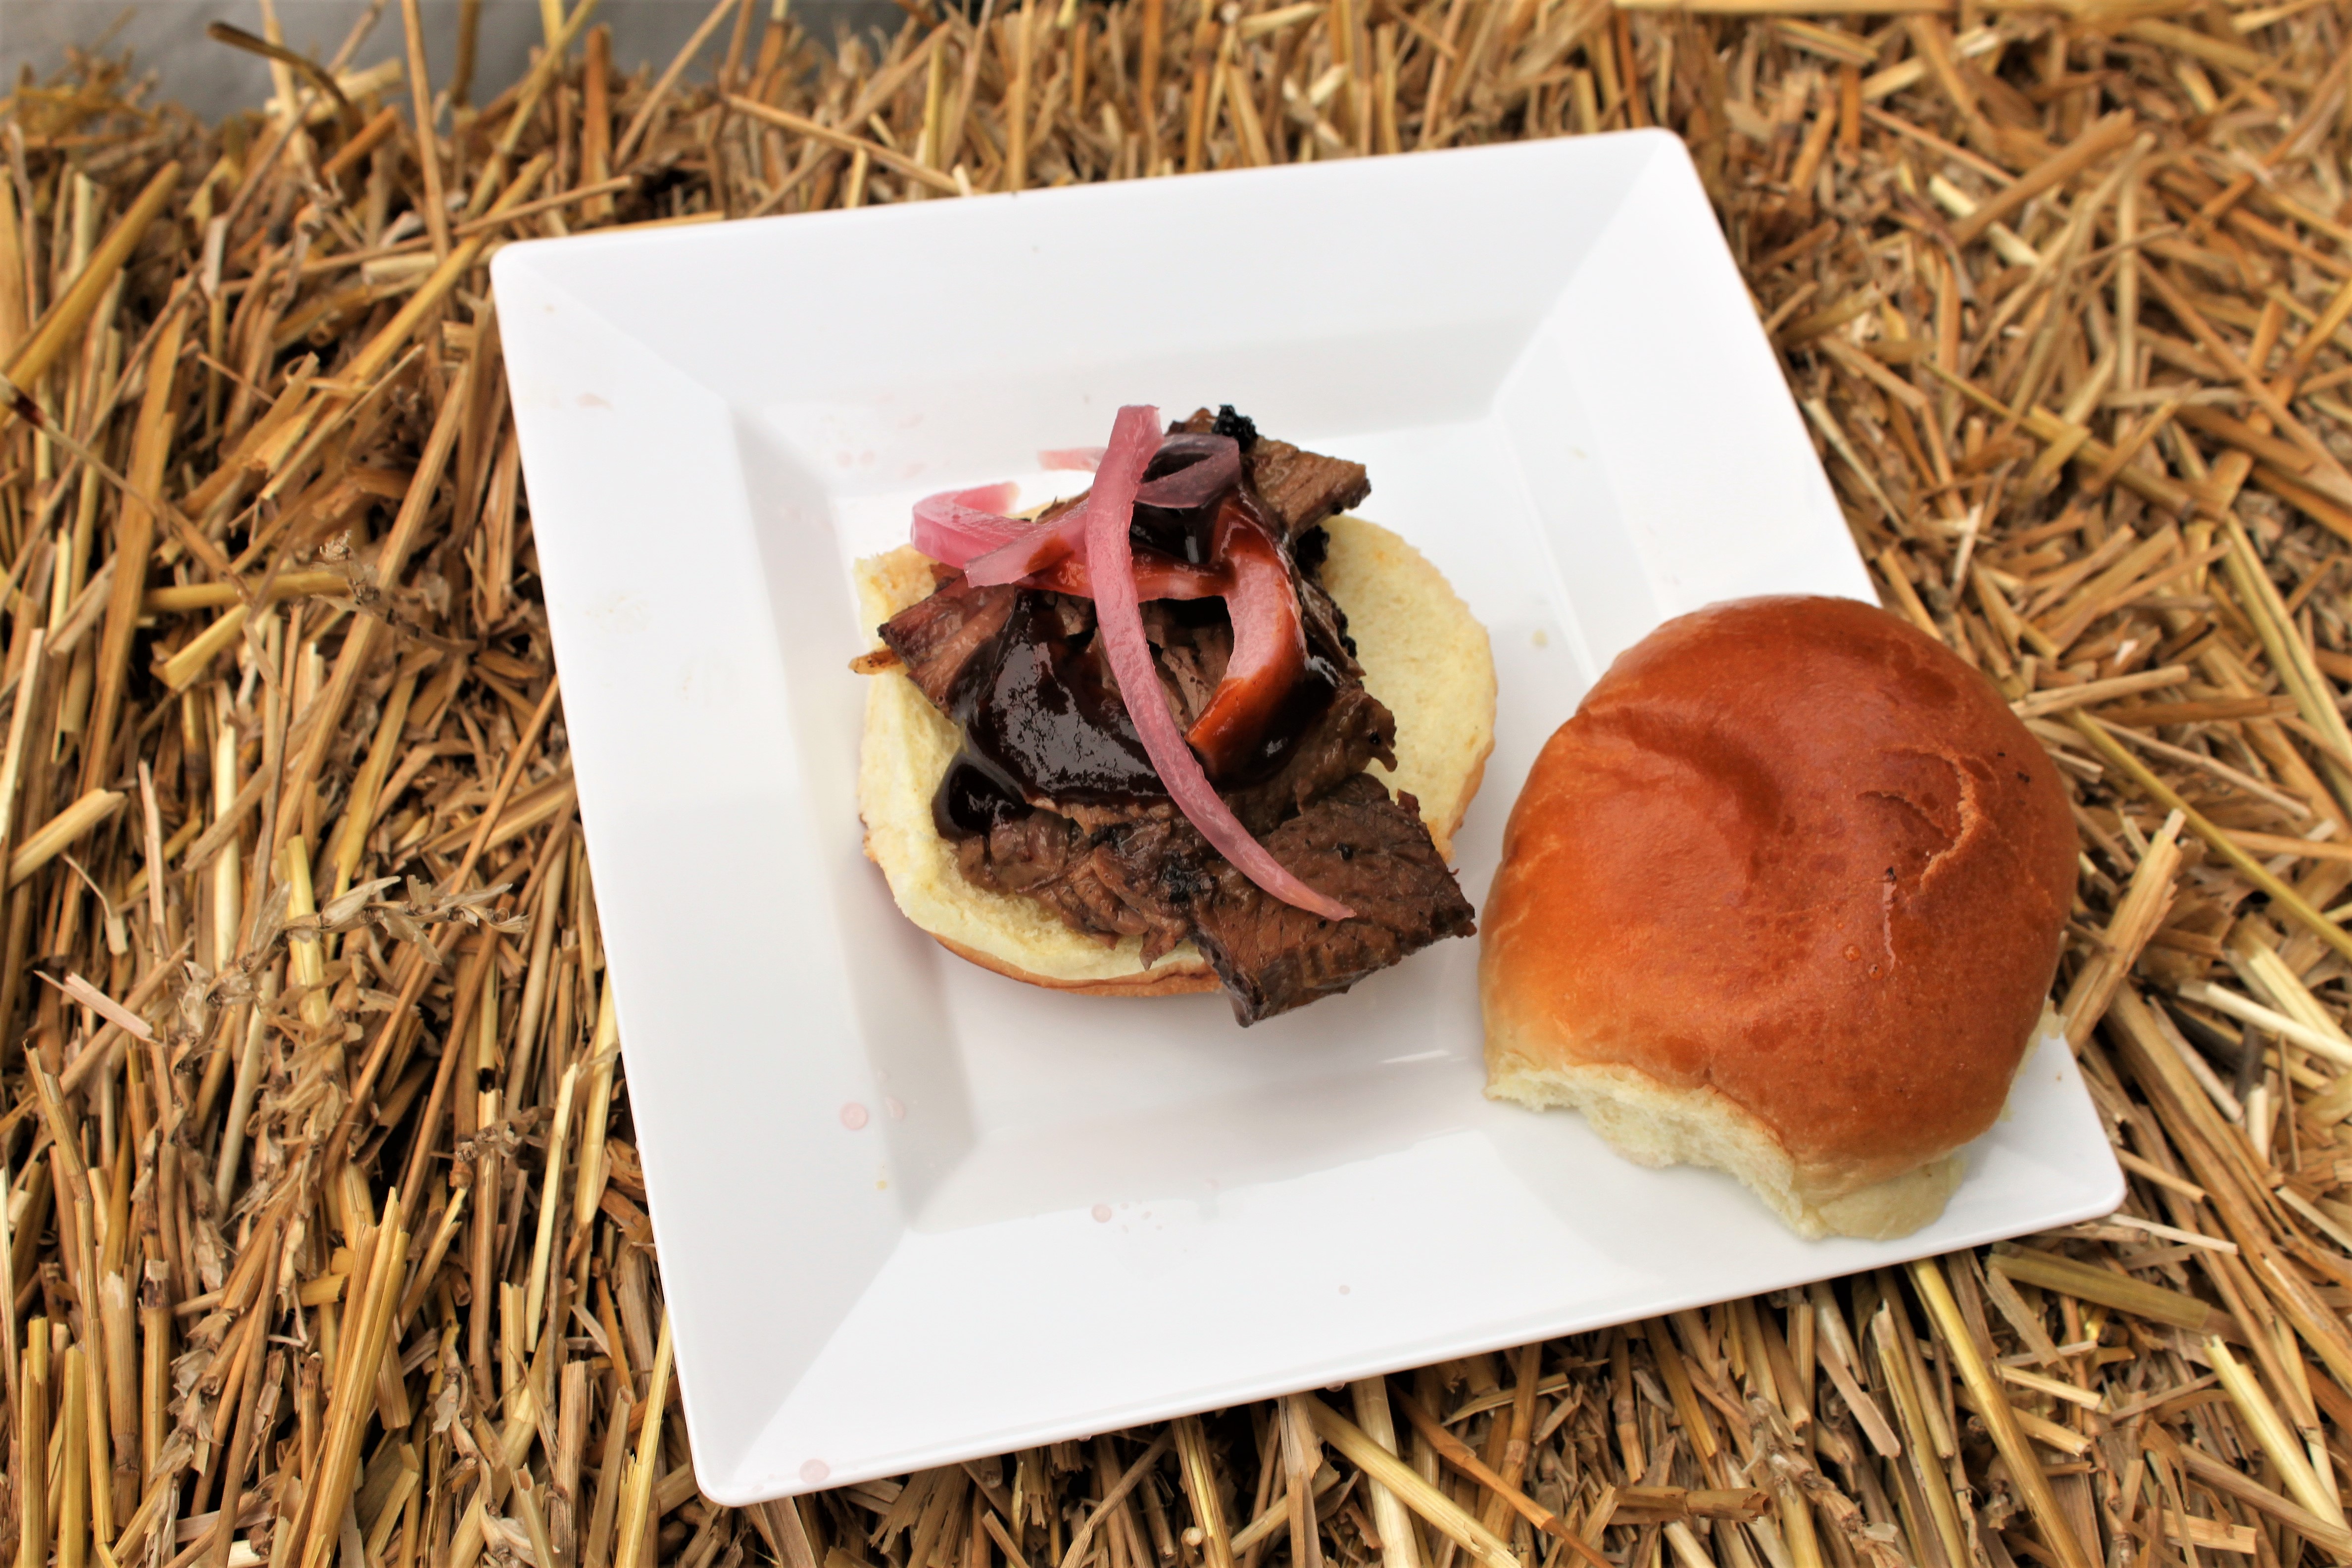 Old Crow Smokehouse Smoked Brisket at Chicago Gourmet was one for my favorites this year!